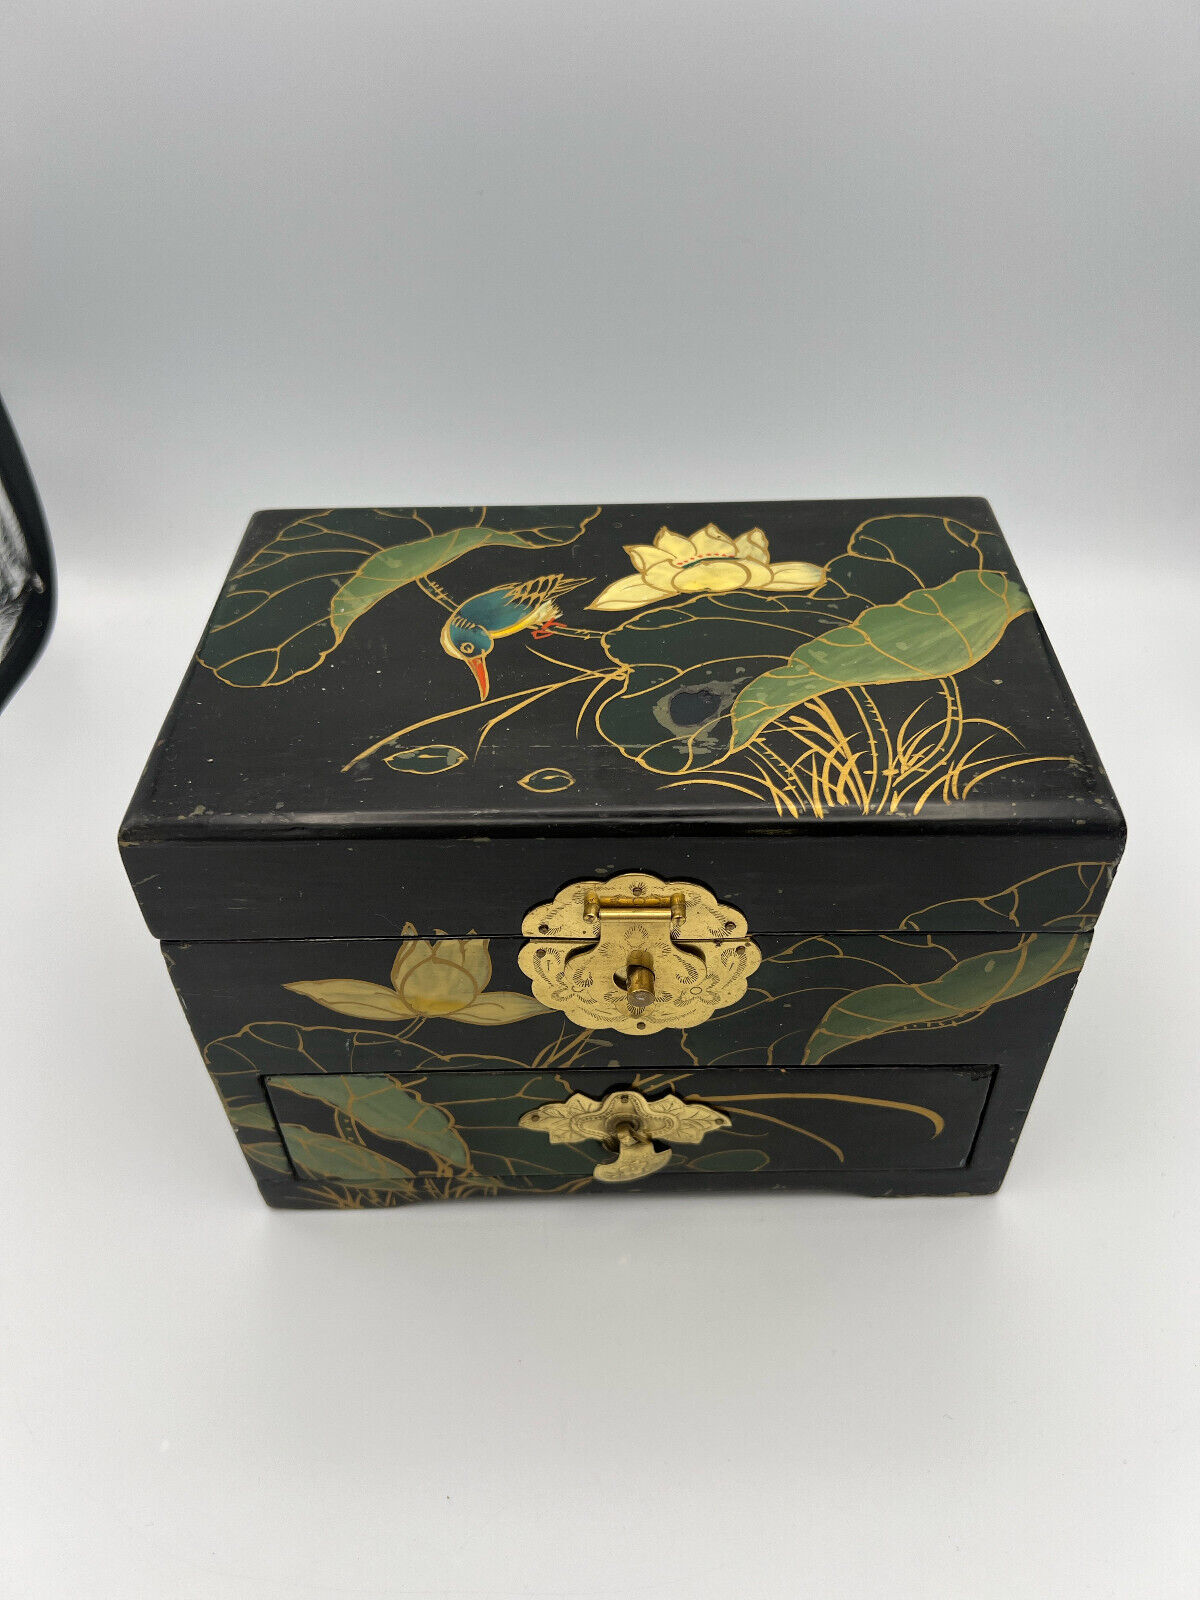 Vintage Pier 1 Imports Asian Wood Lacquered Jewelry Box w/ Brass Fittings